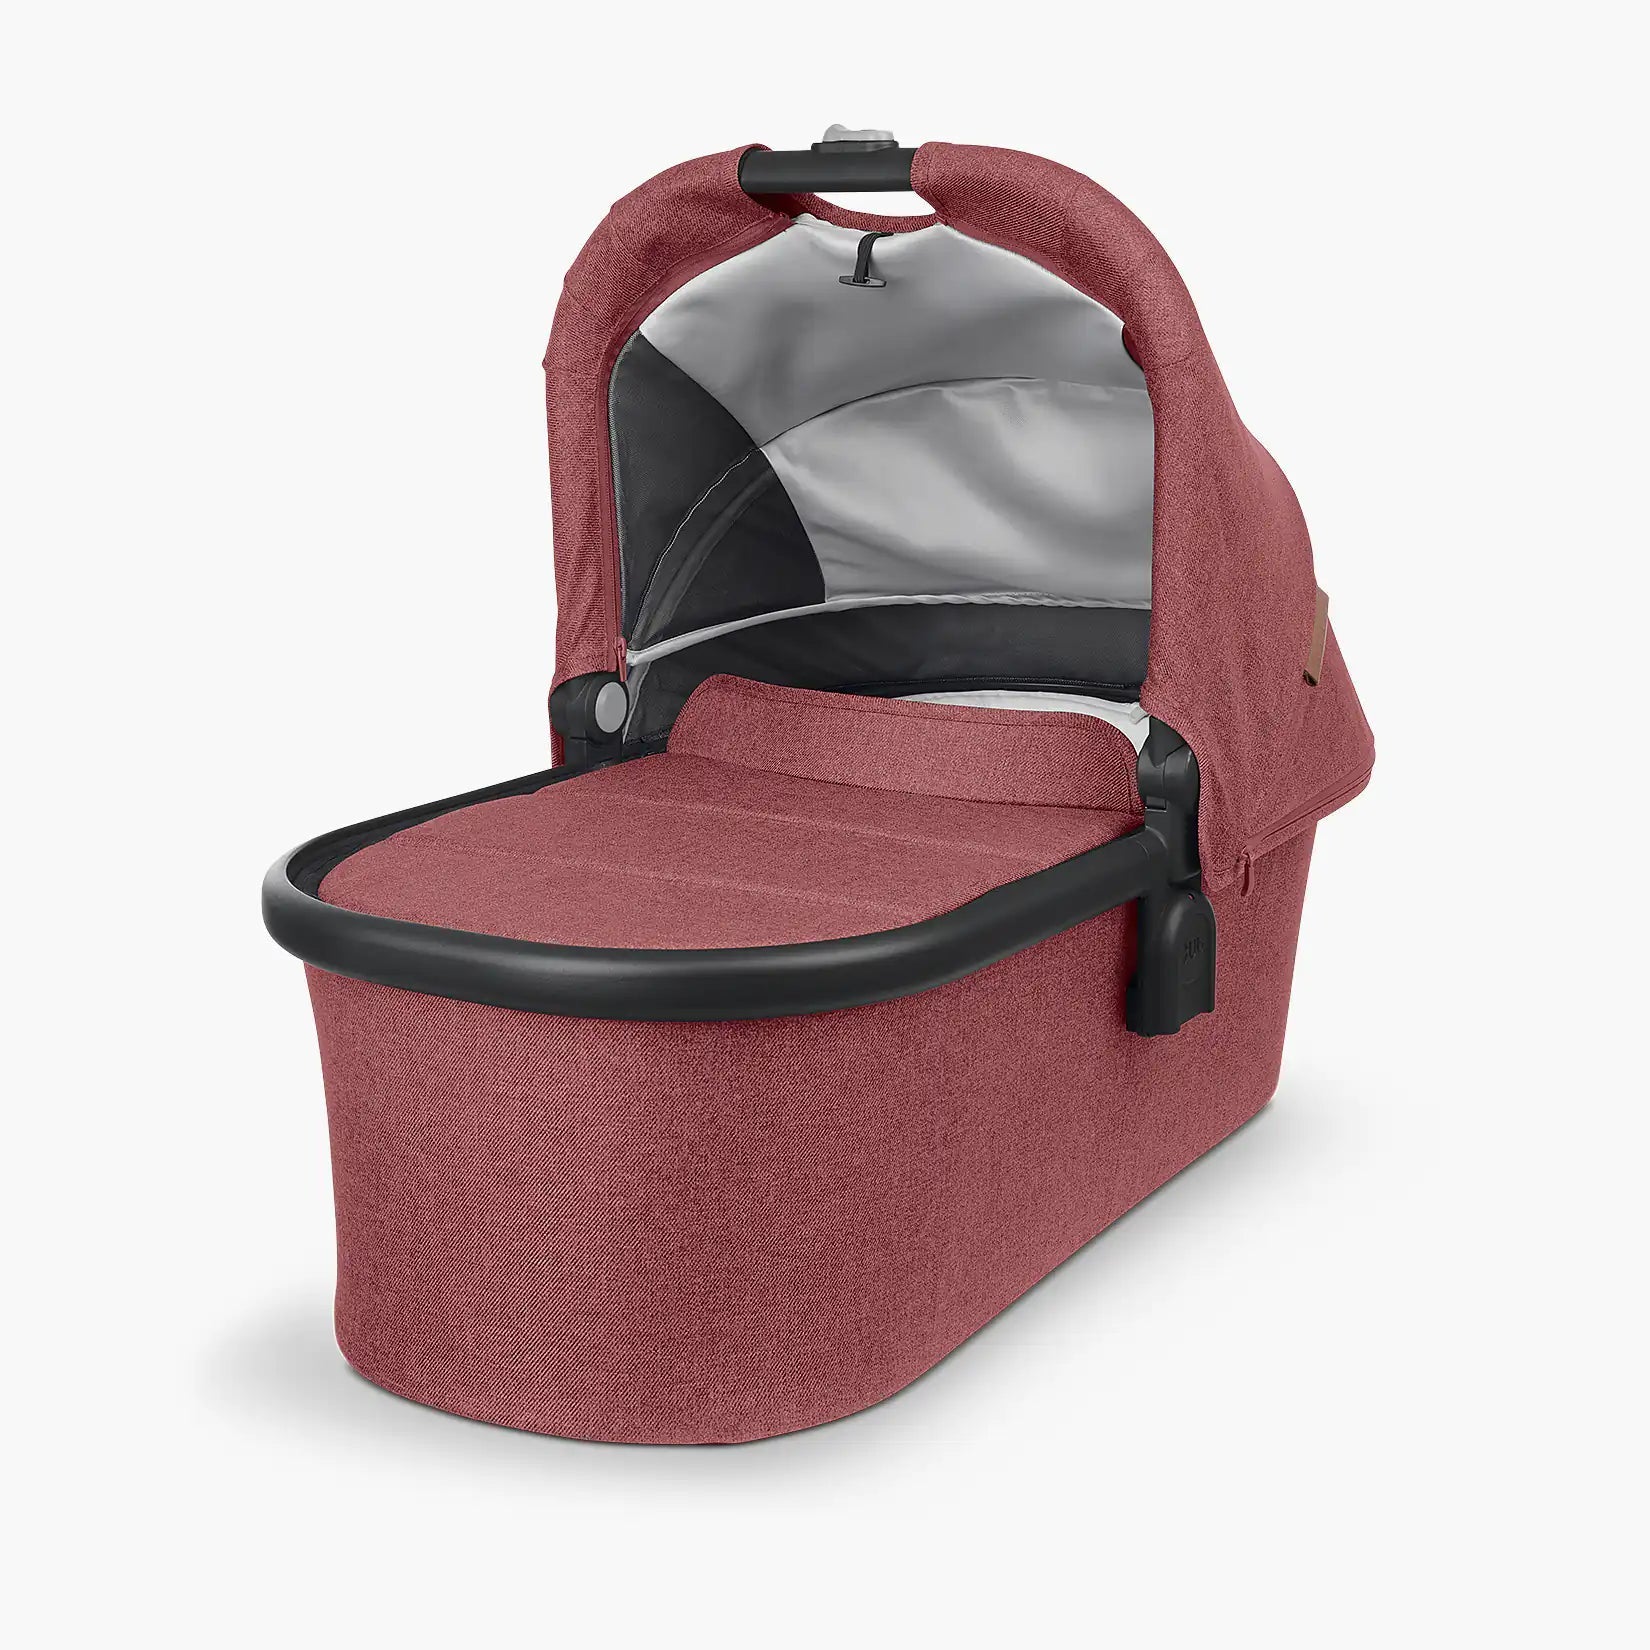 UPPAbaby Bassinet - ANB Baby -810030099079$100 - $300